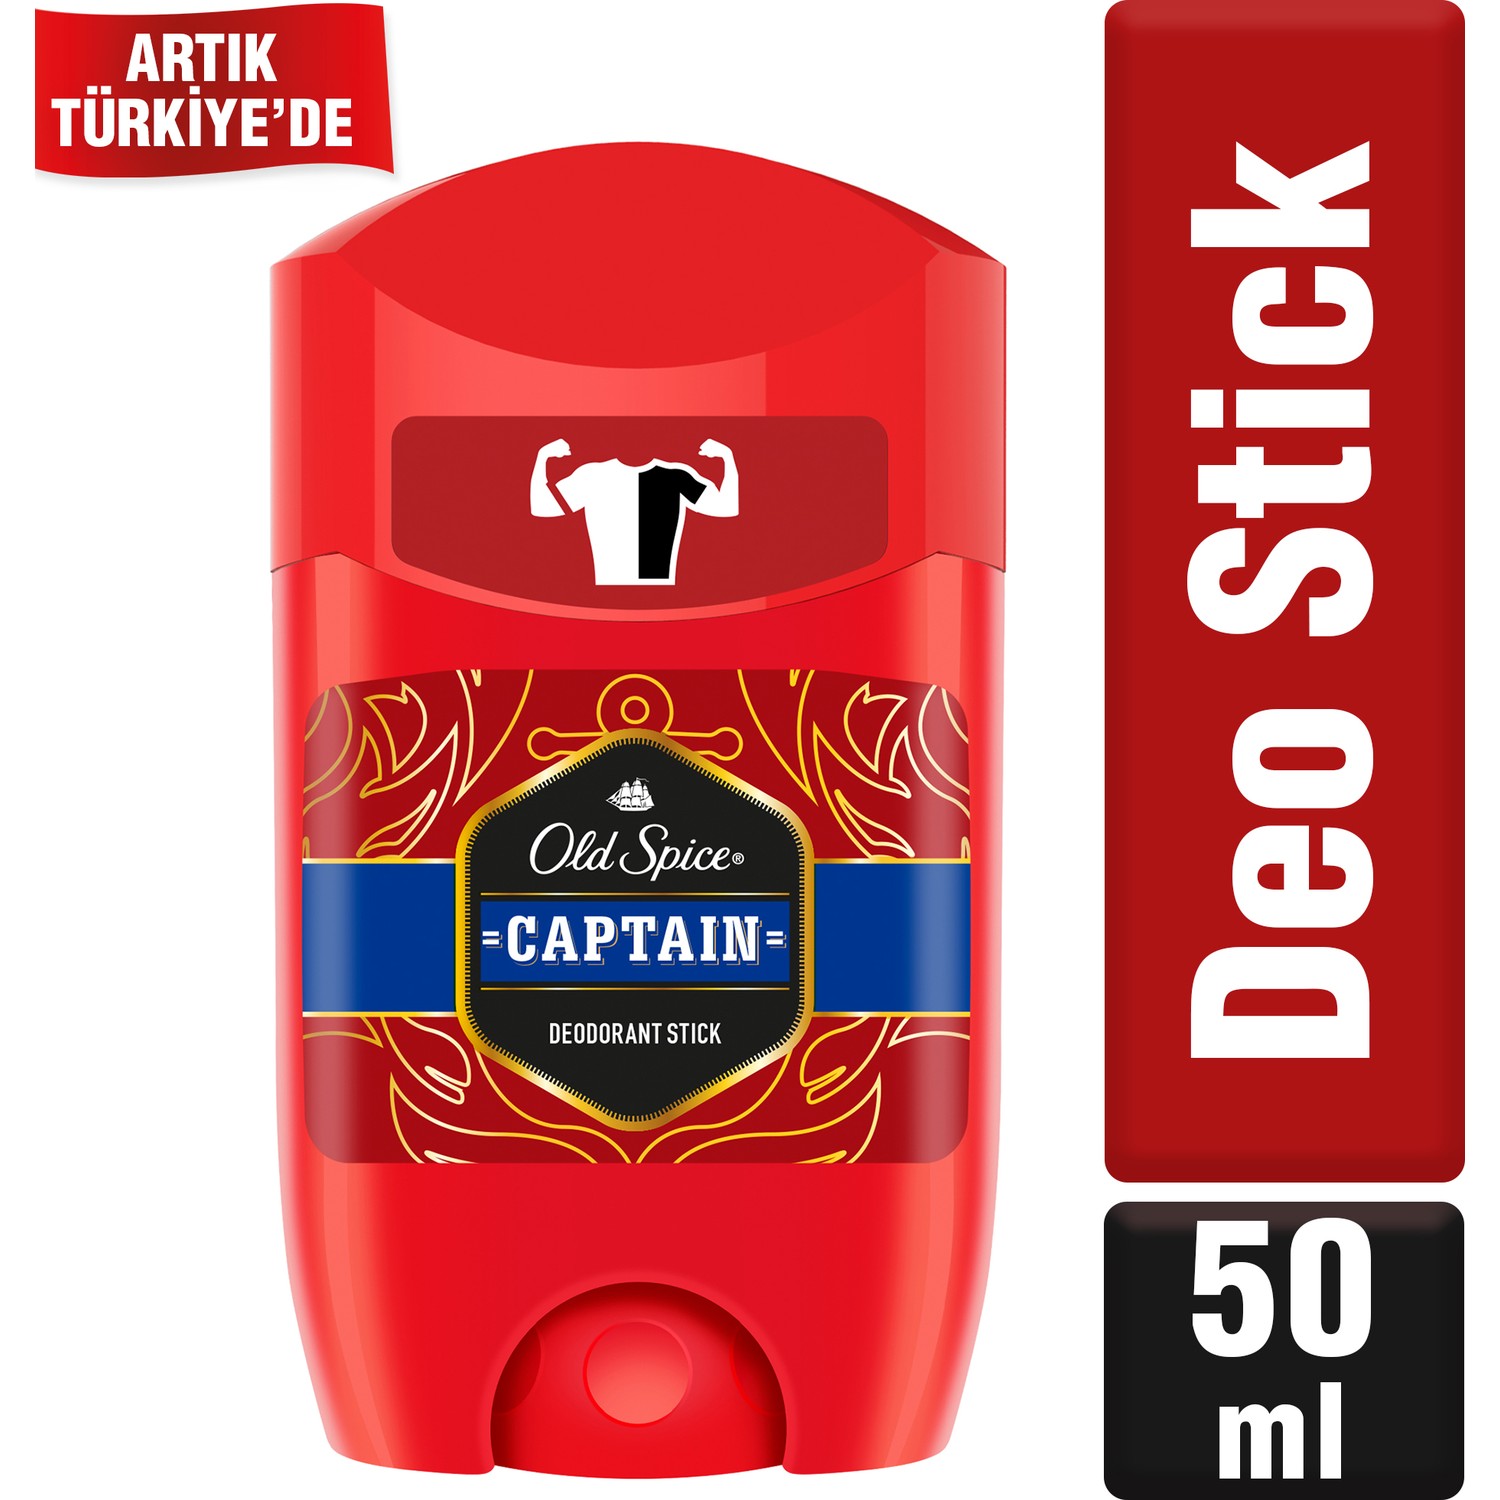 Old Spice Deo Stick Captain 50 ml.